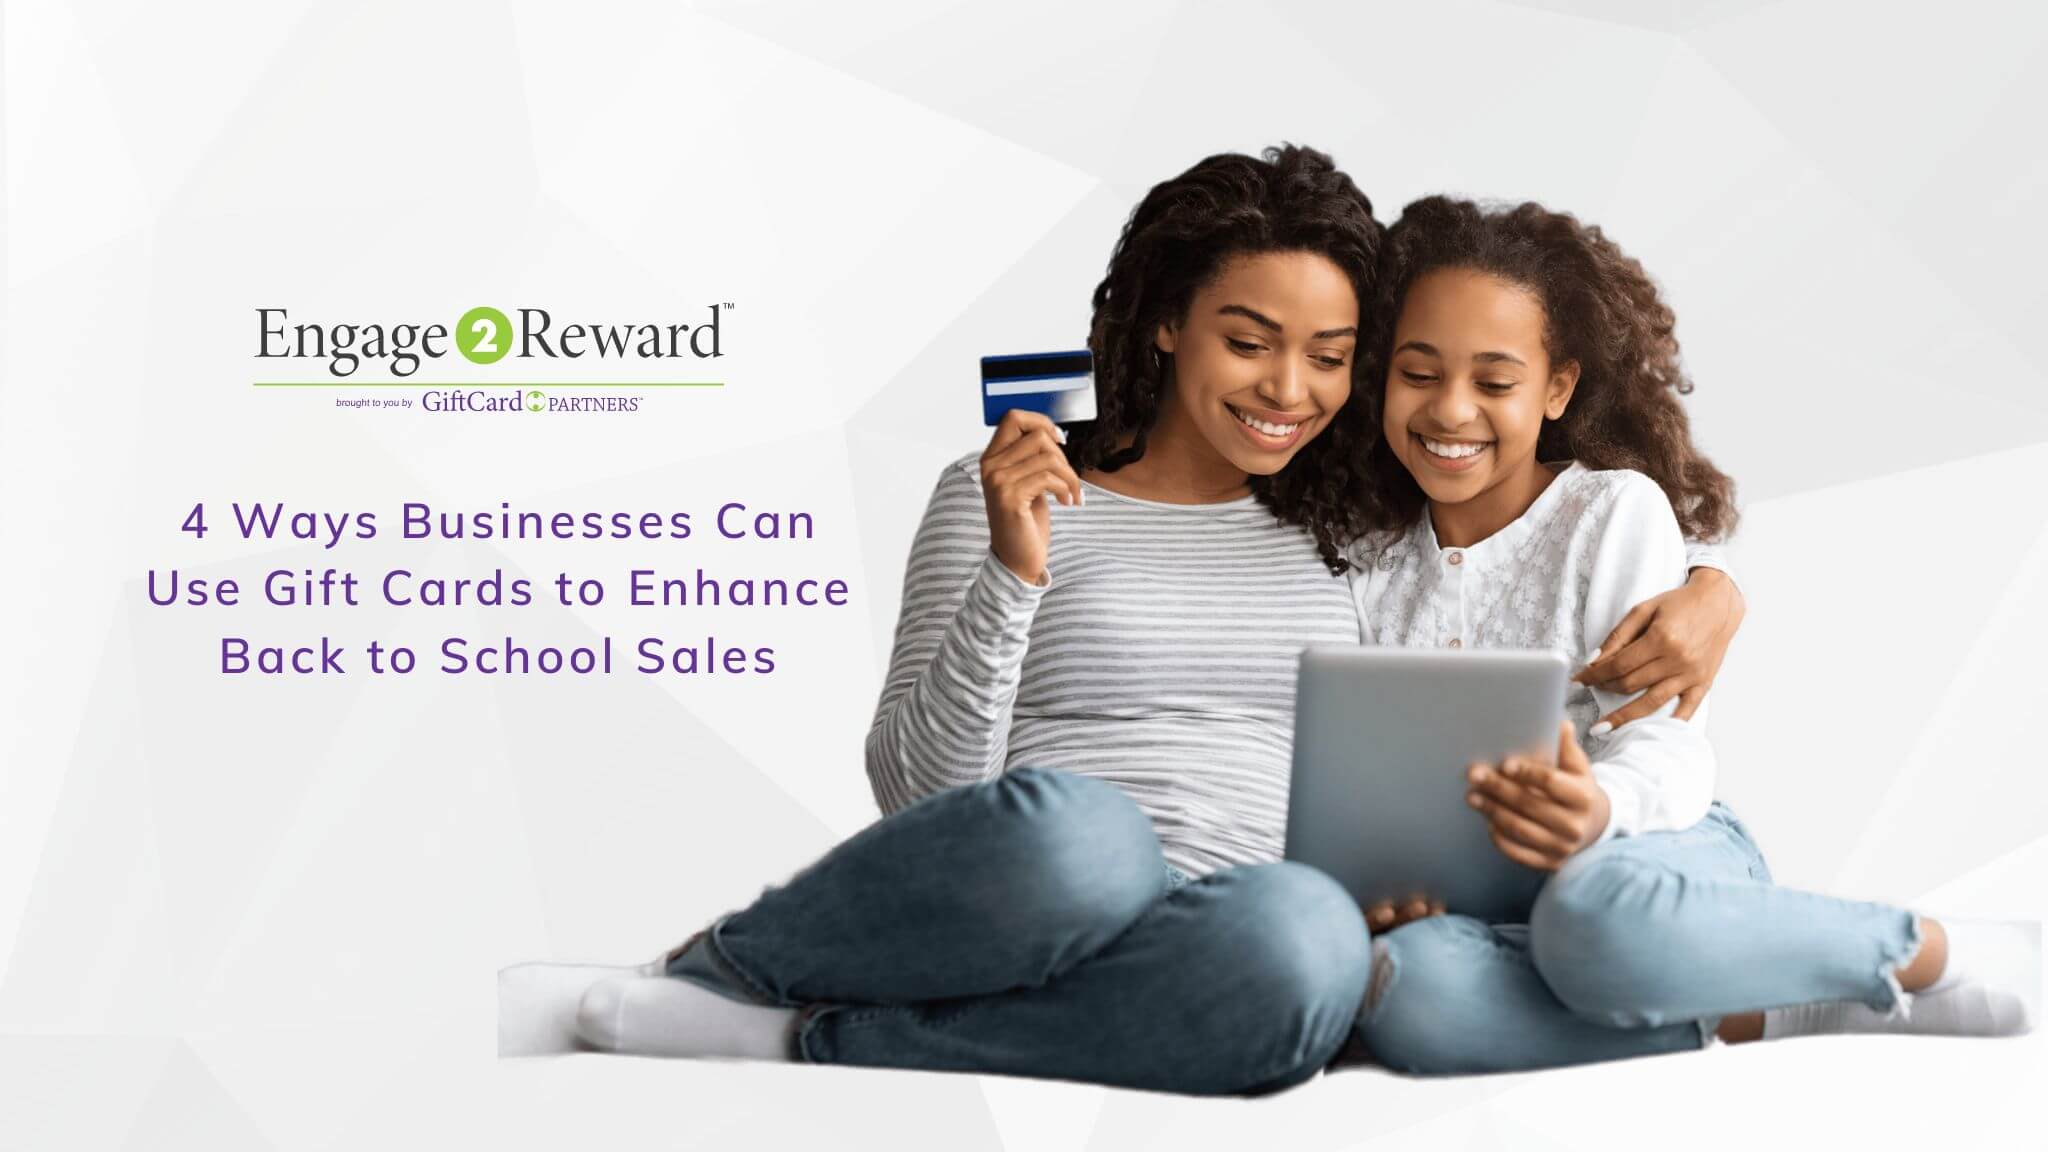 4 Ways Businesses Can Use Gift Cards to Enhance Back to School Sales